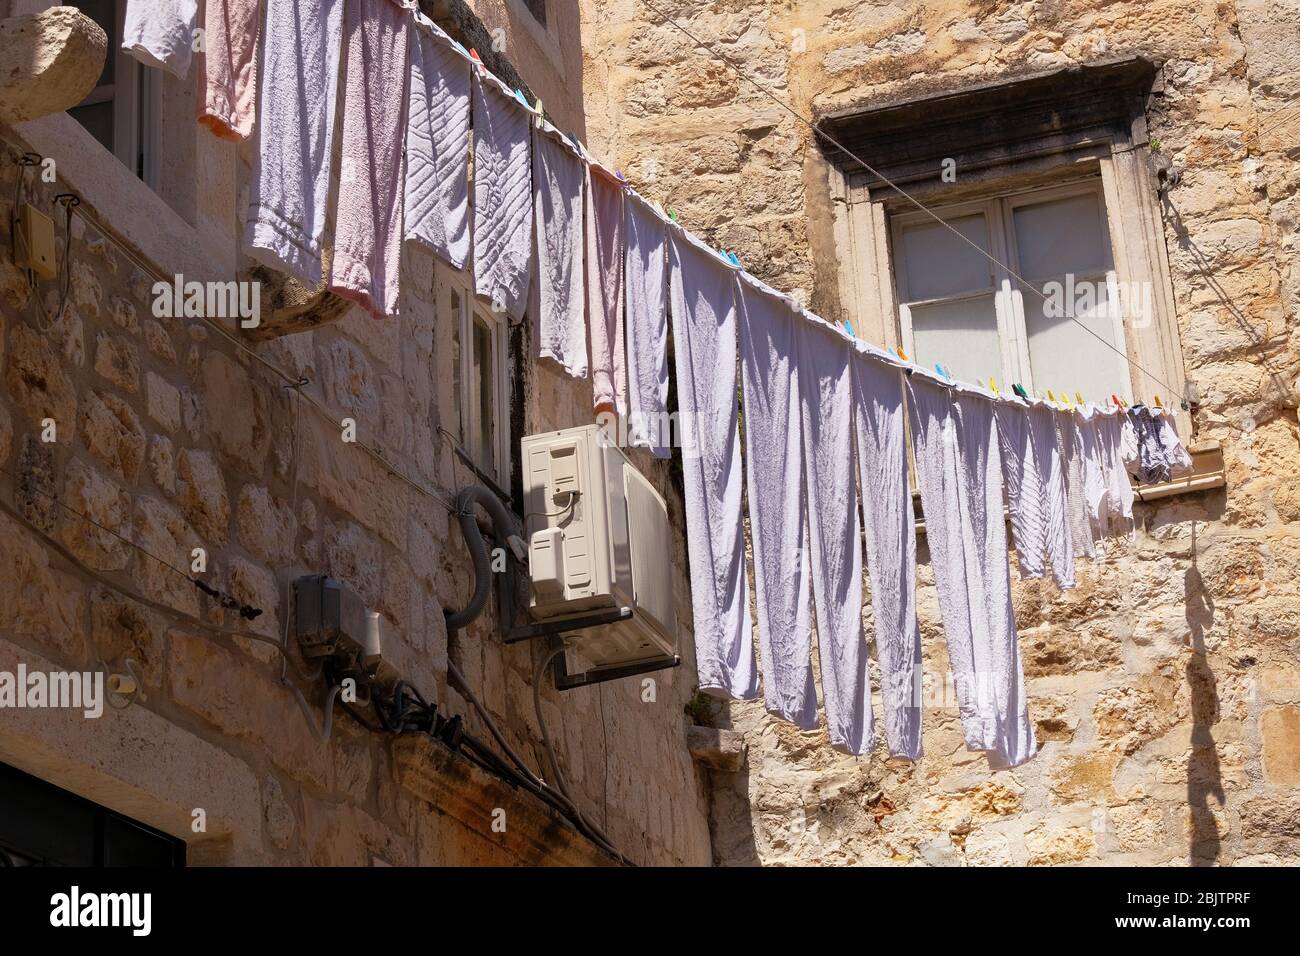 Fresh clean white clothes on a ropet. Traditional drying on washing line in outdoor. Stock Photo